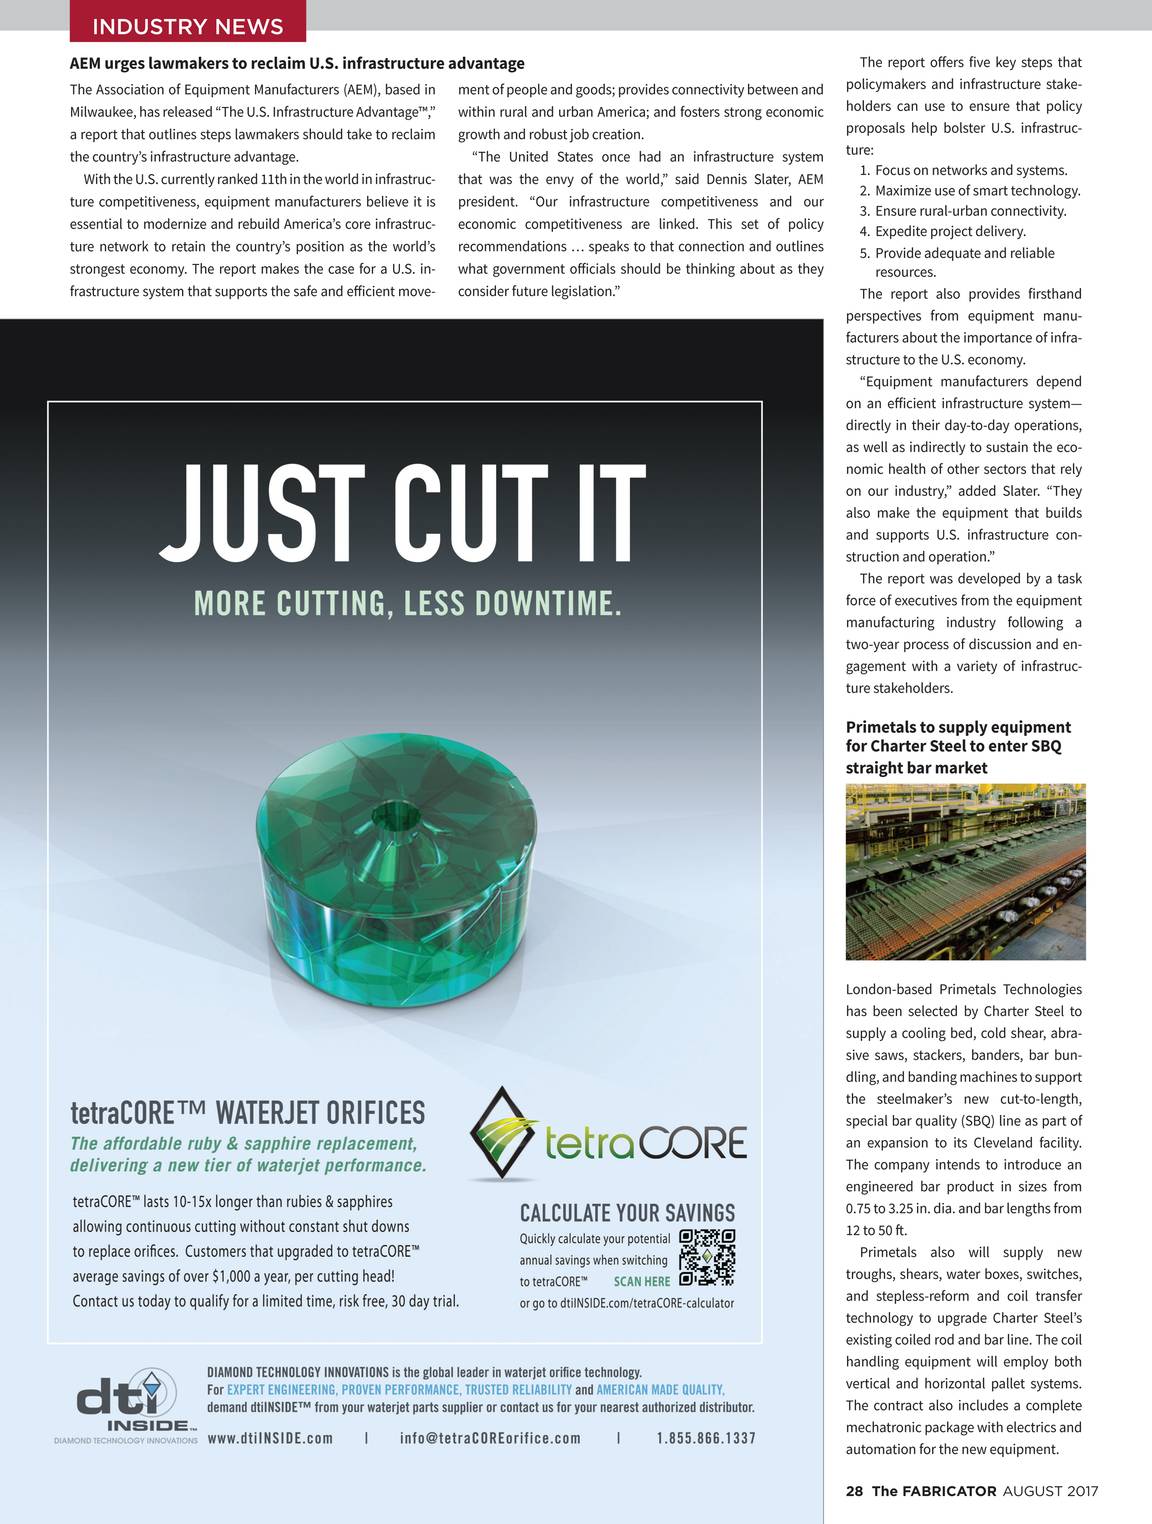 The Fabricator August 2017 Page 29